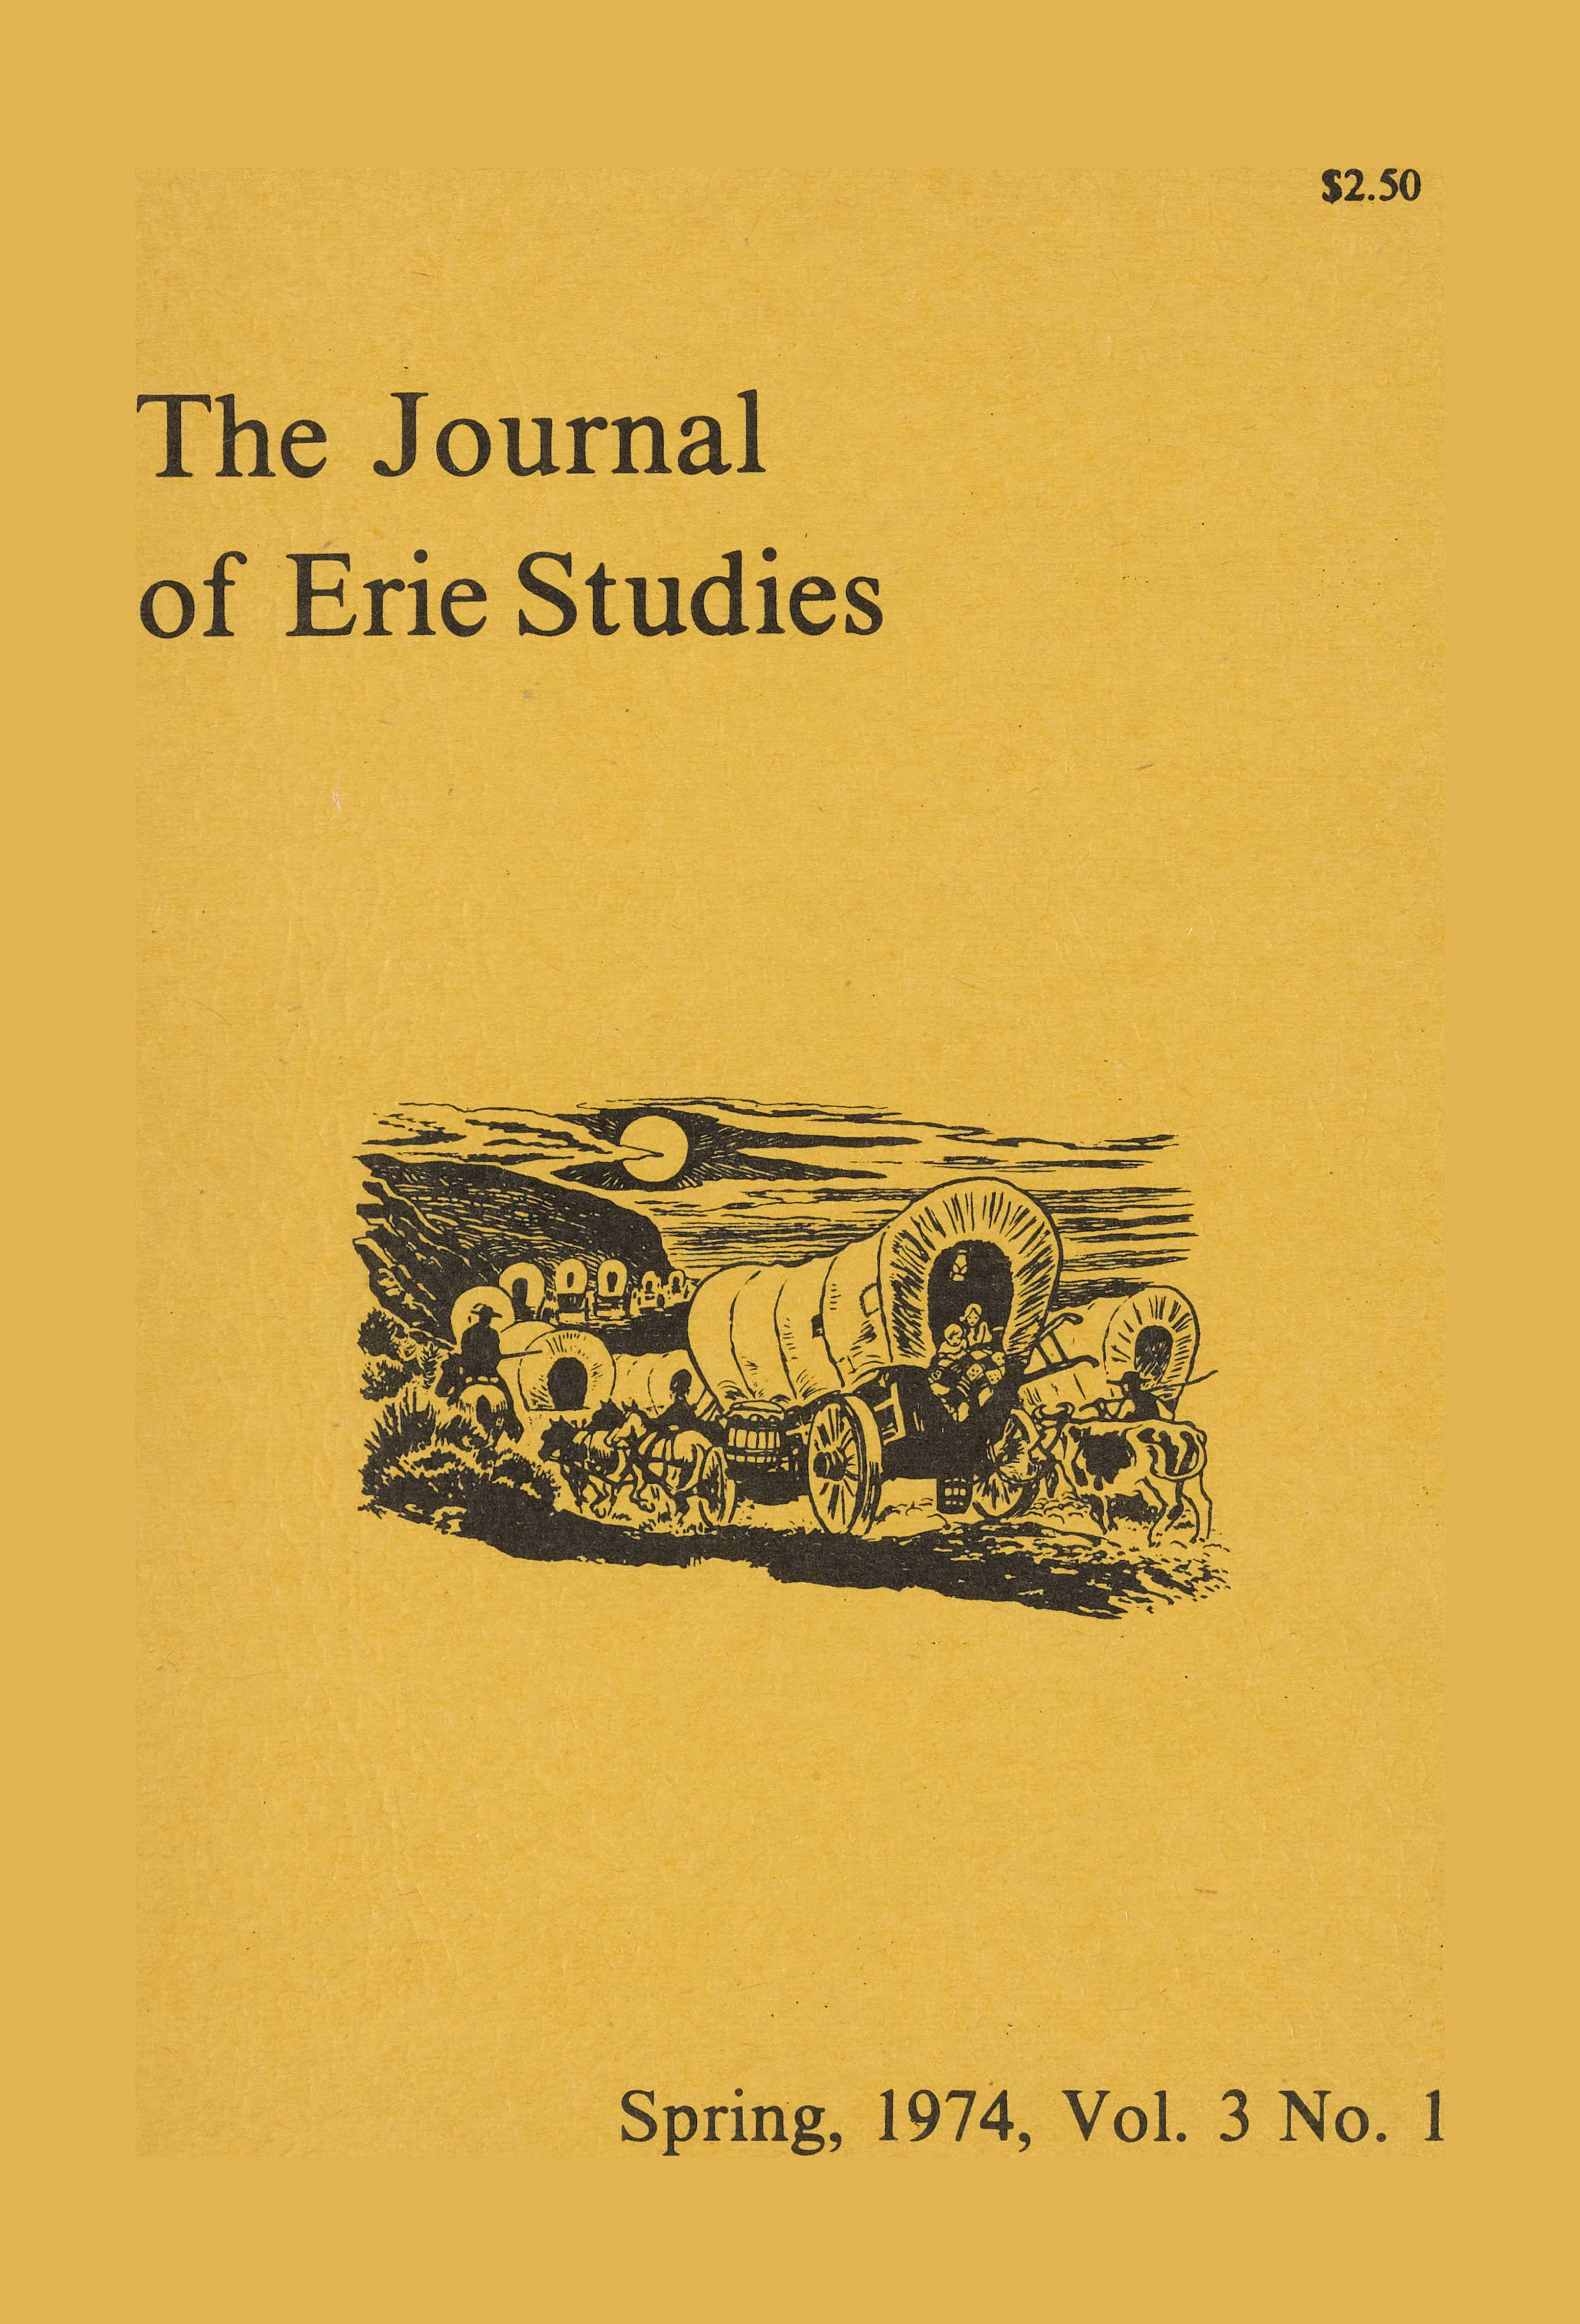 Sketch of covered wagons on a trail with the text, "The Journal of Erie Studies, Spring, 1974, Vol. 3 No. 1."